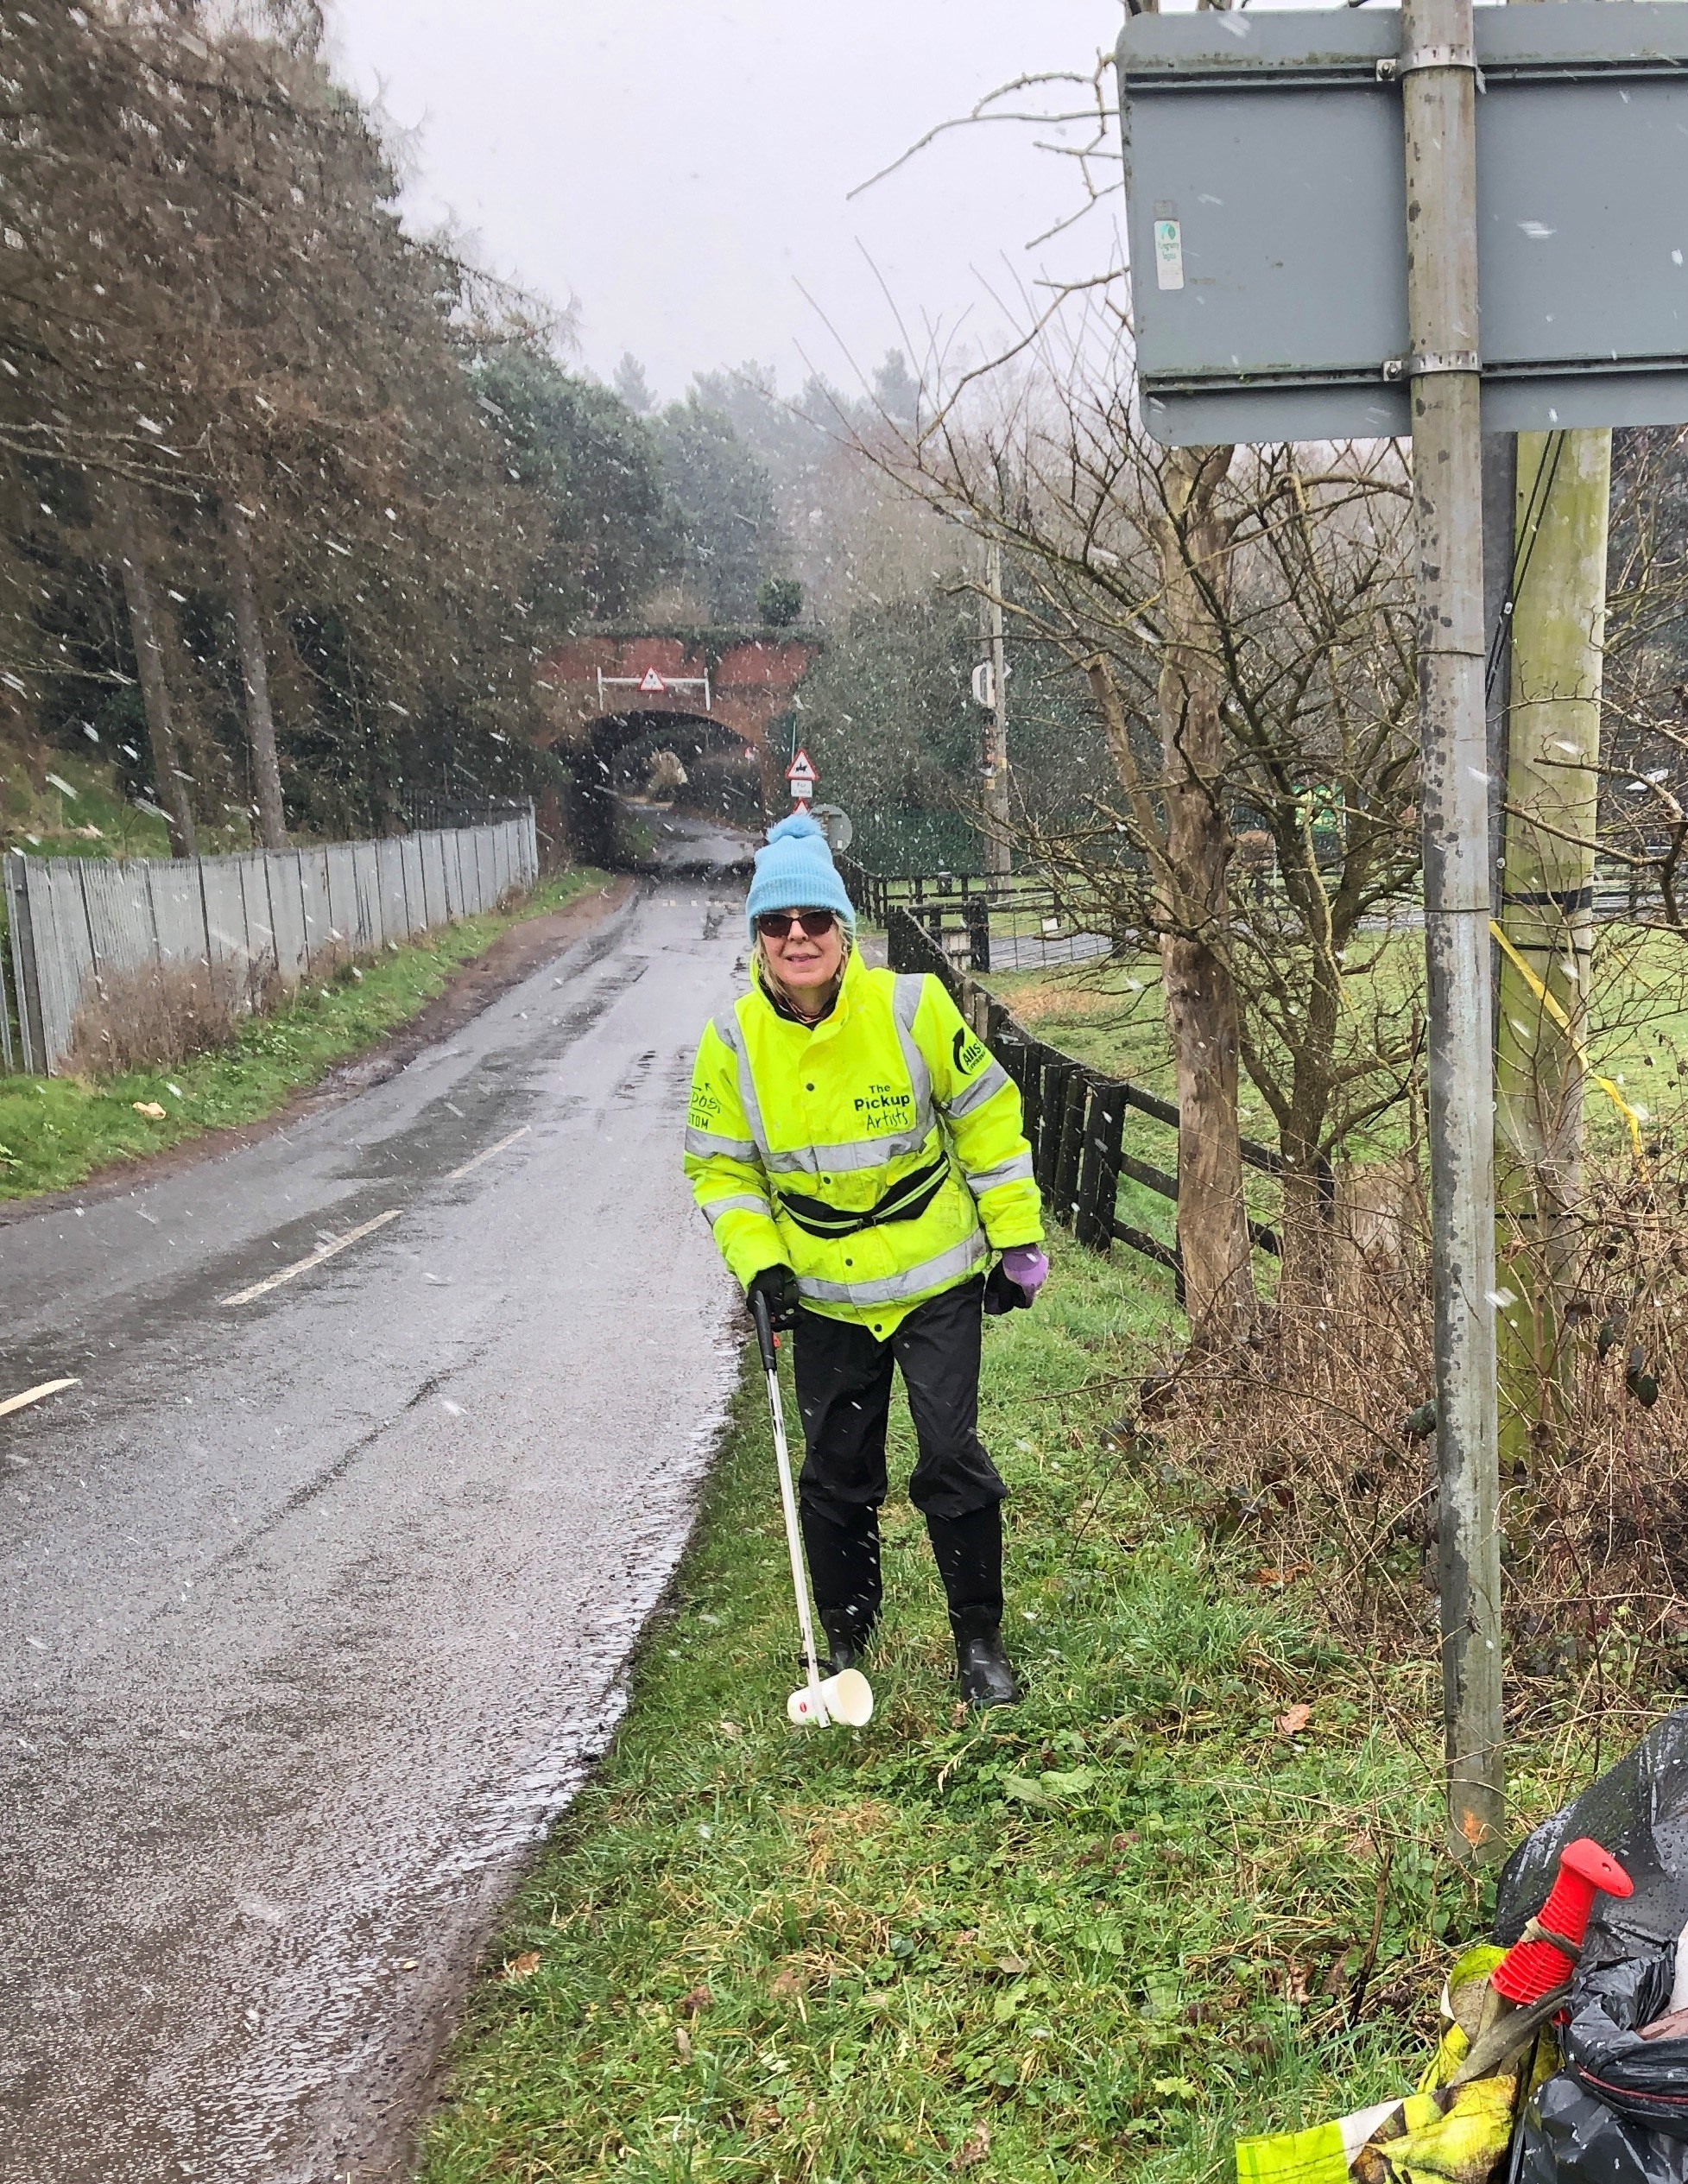 A woman in high visibility jacket litter picking on the roadside with snow falling